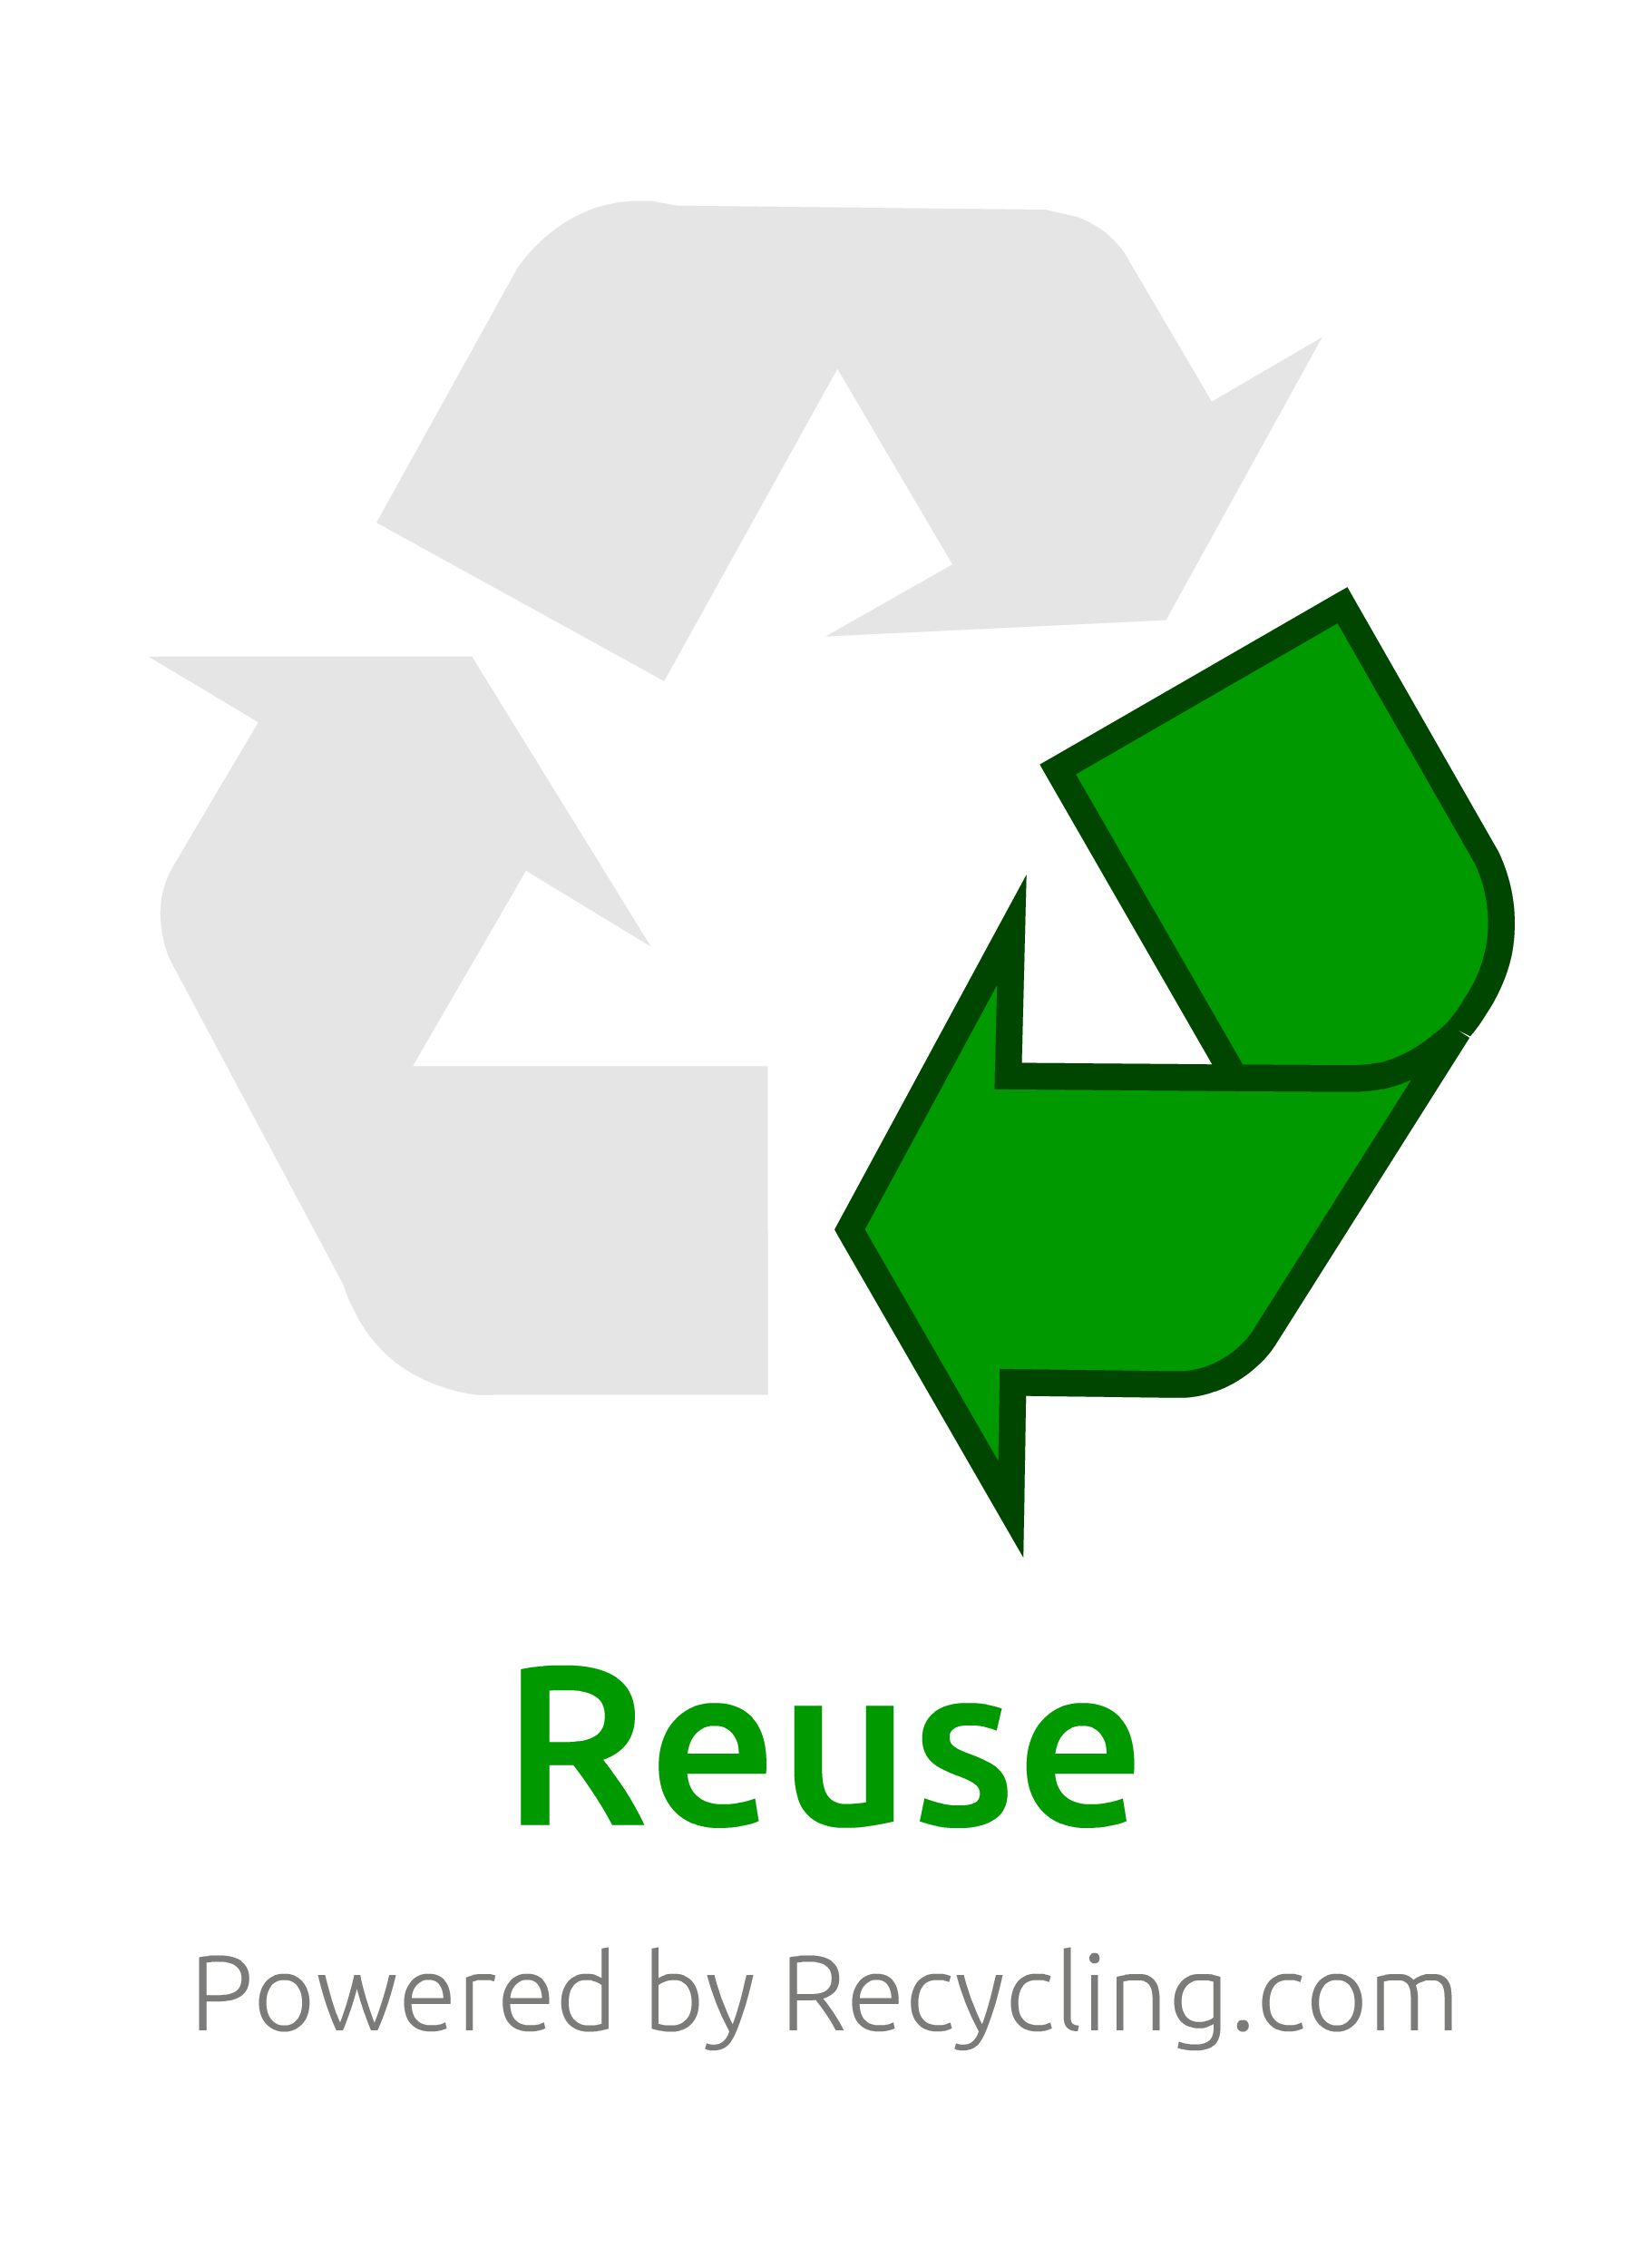 Reuse Logo - The Recycling Trilogy - Reduce, Reuse, Recycle | Download